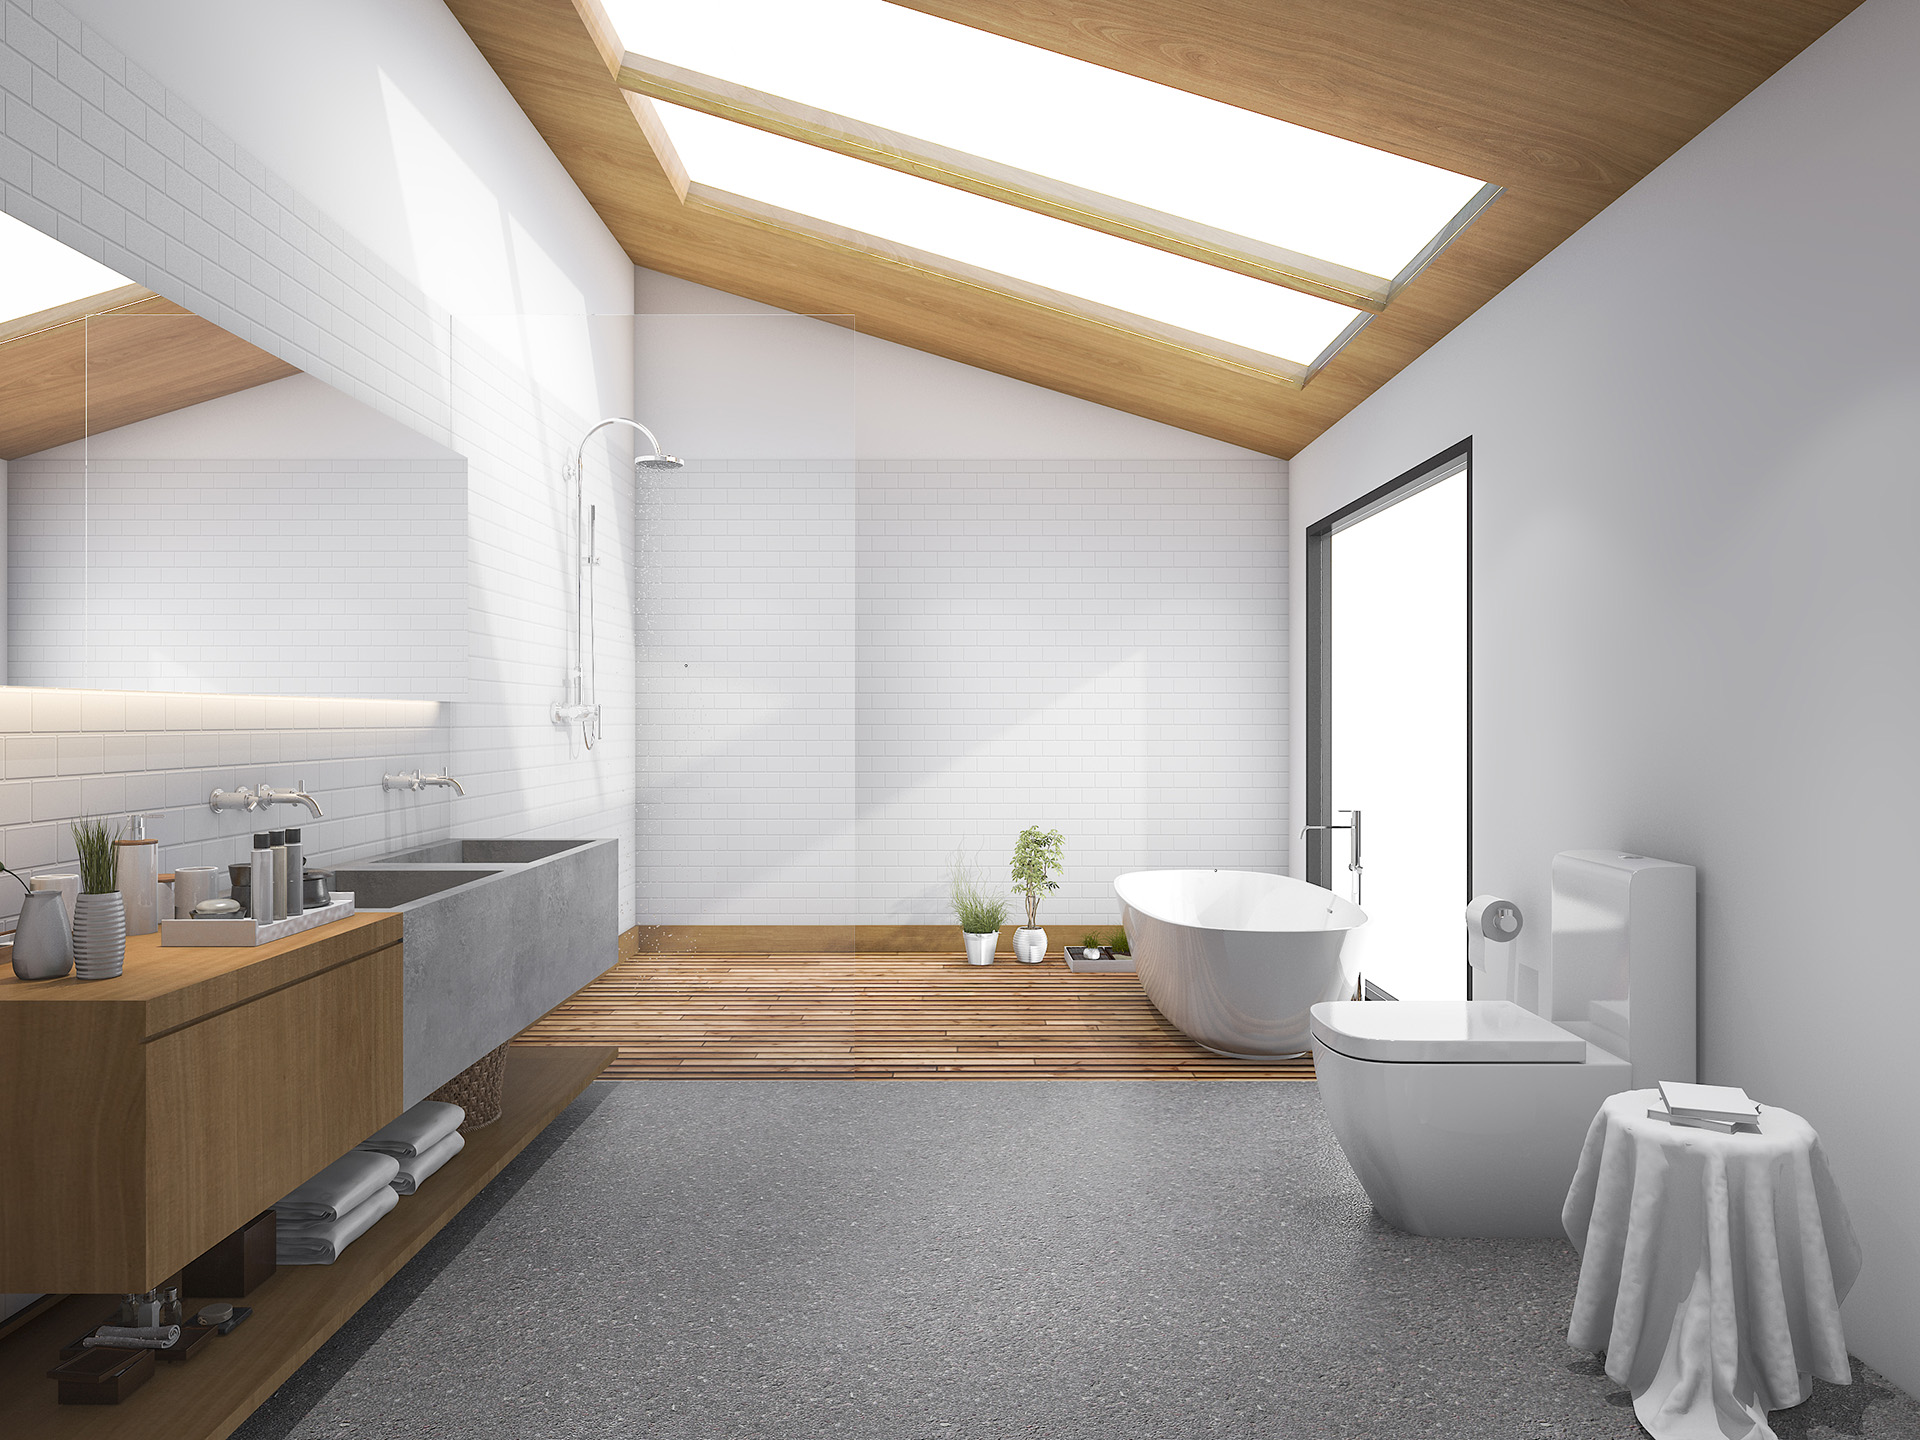 skylight wood roof with modern design bathroom and toilet